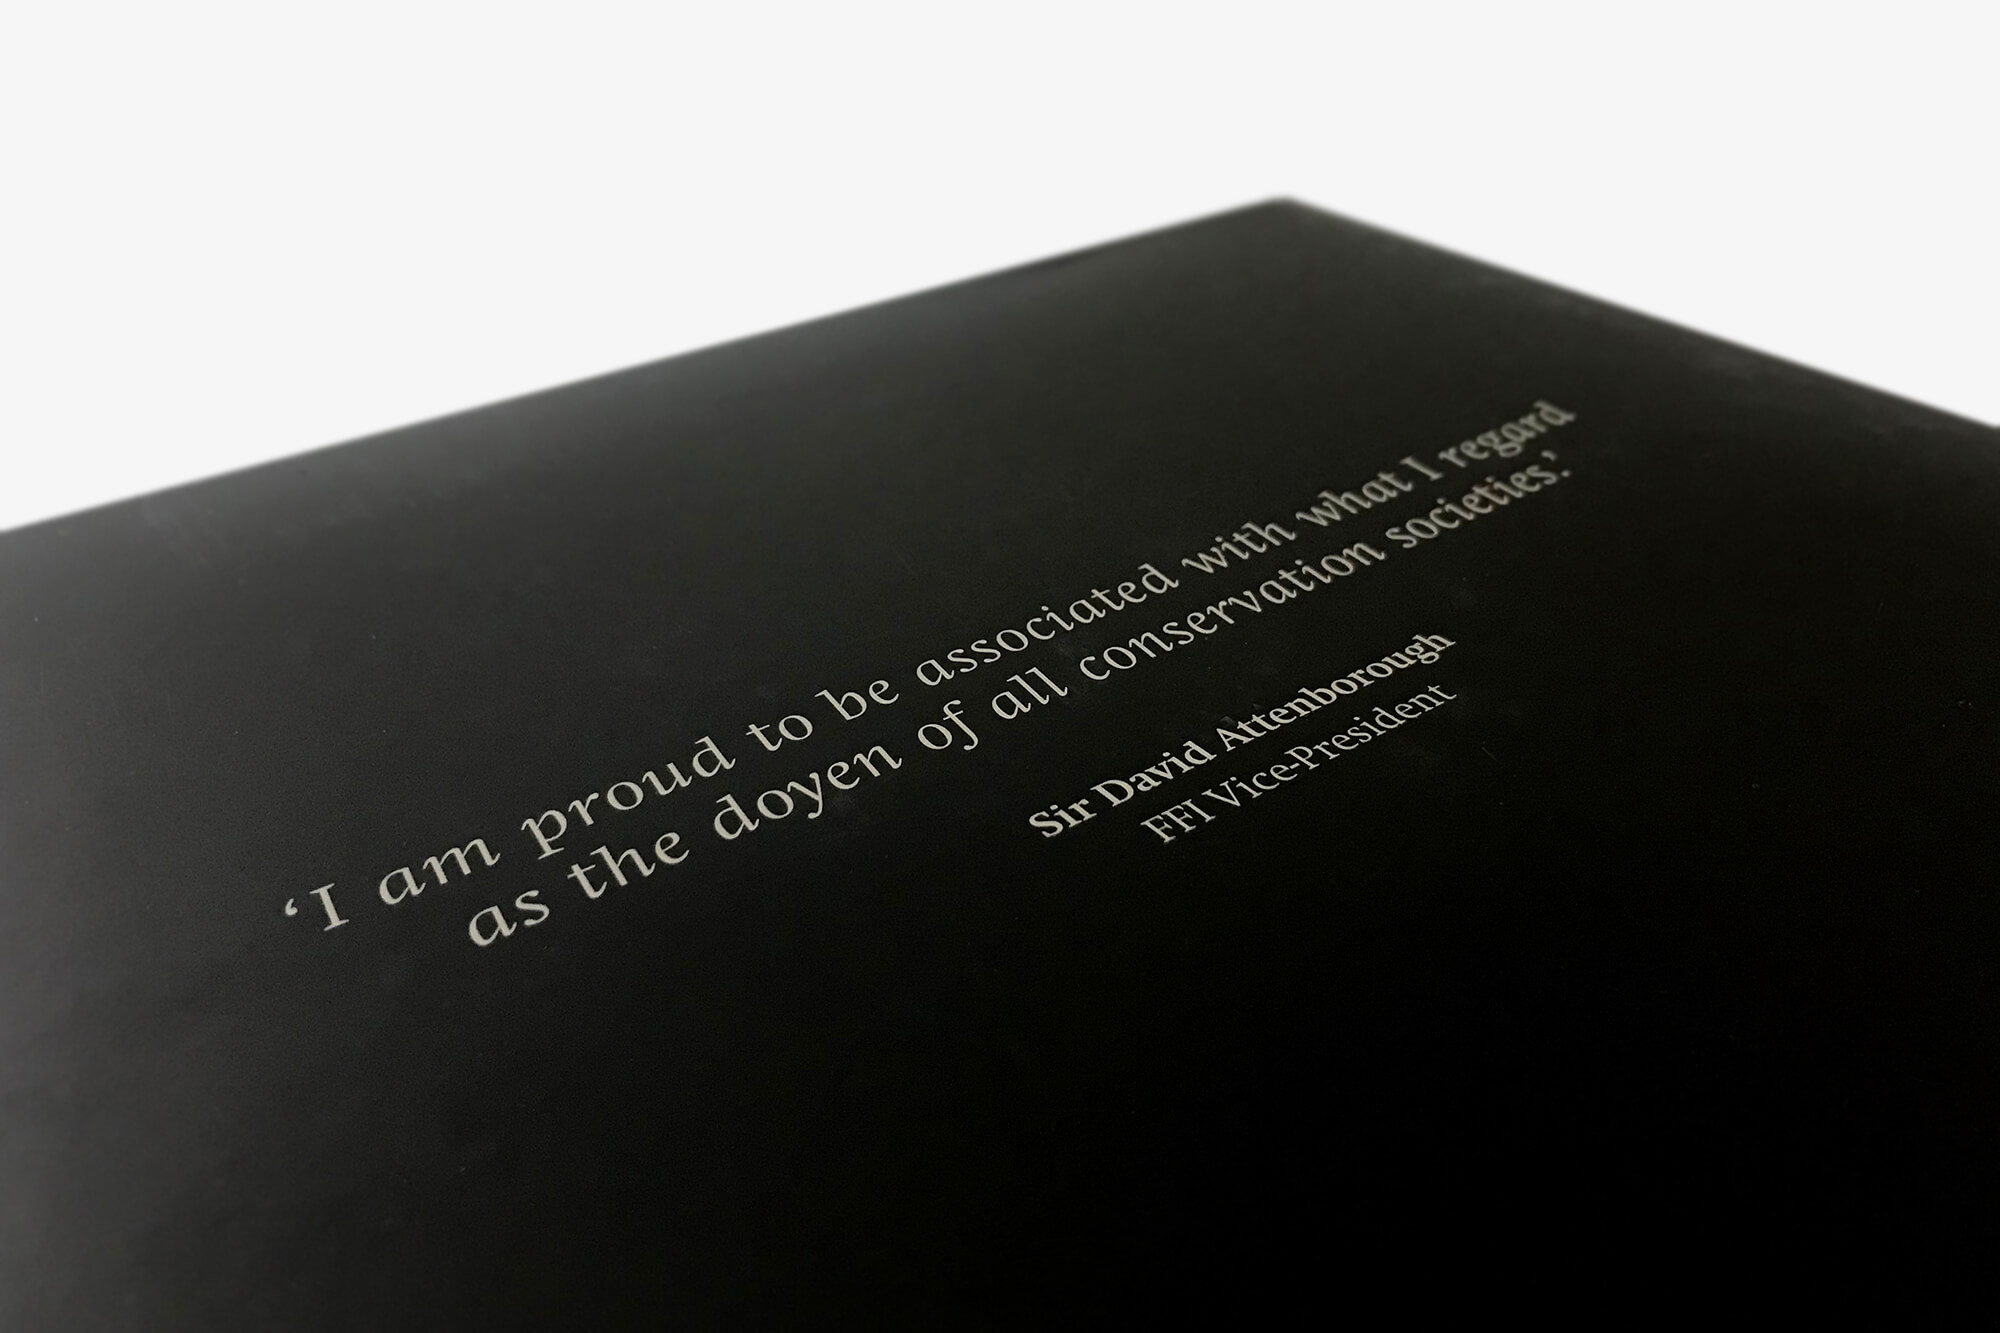 Back cover quote